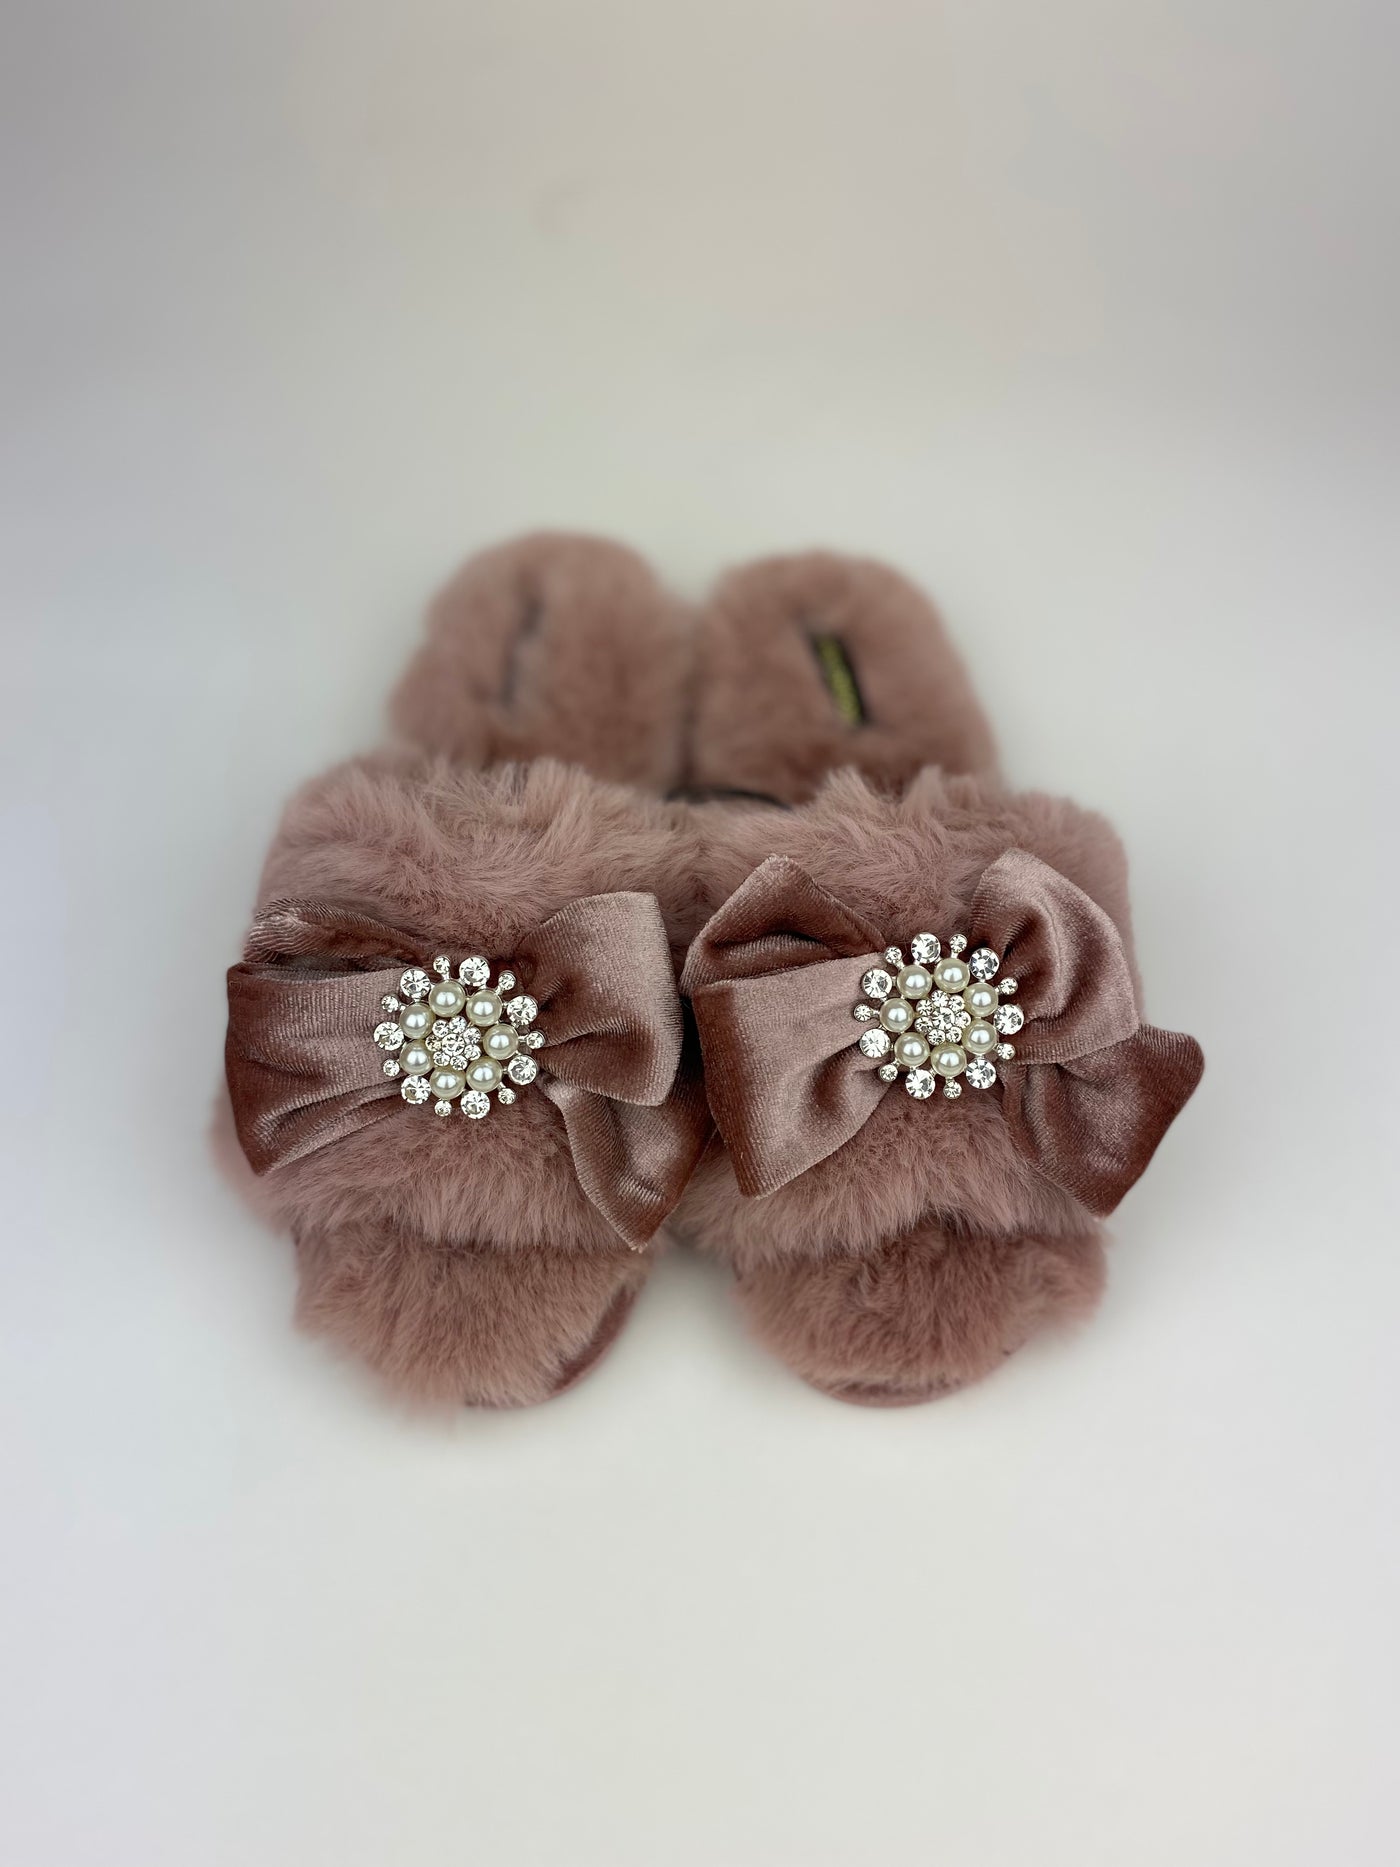 Gorgeous cozy glam "slip on" slippers